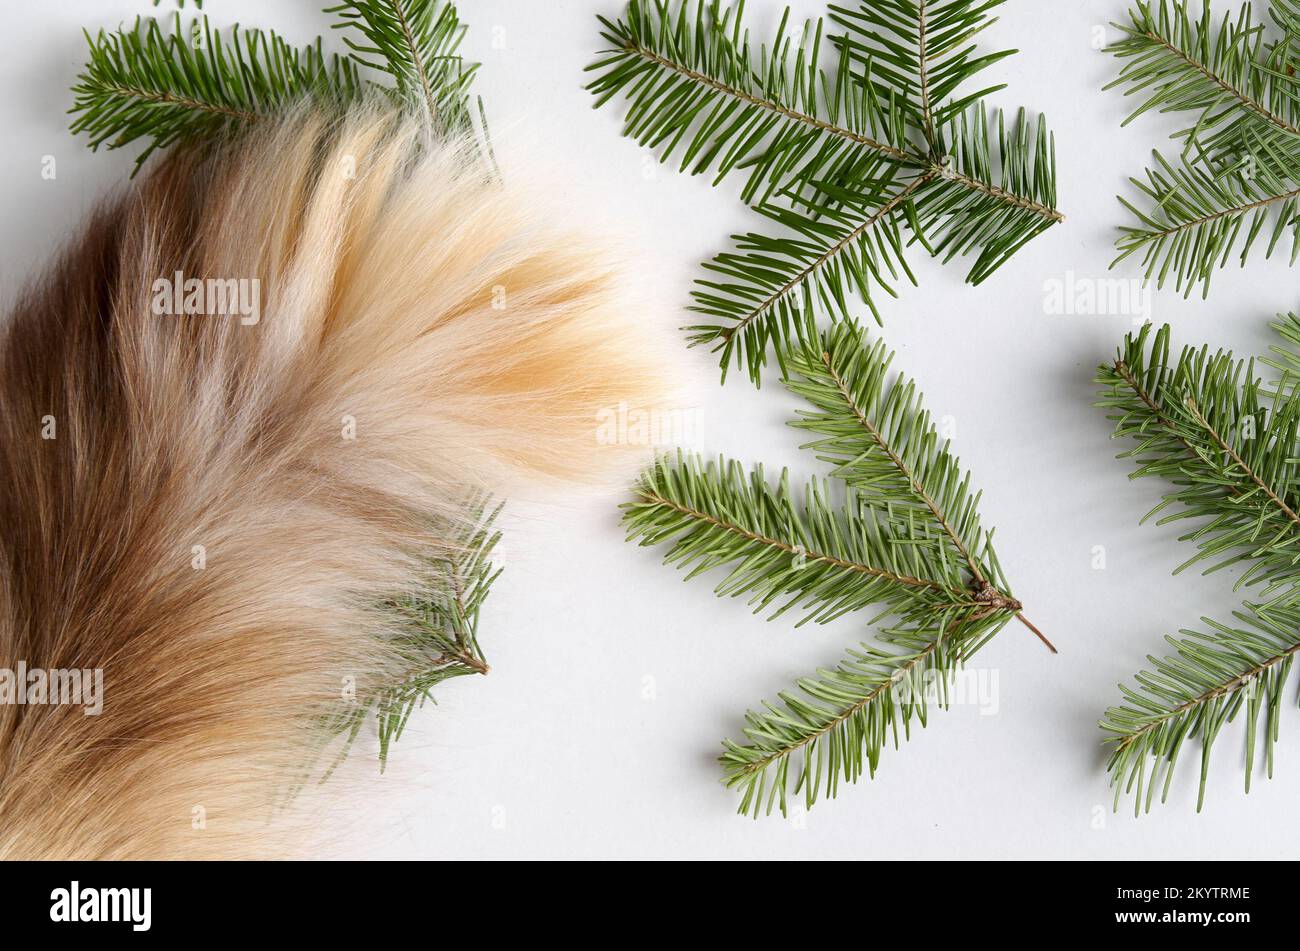 Christmas fletley from spruce branches and a fluffy cat's tail Stock Photo